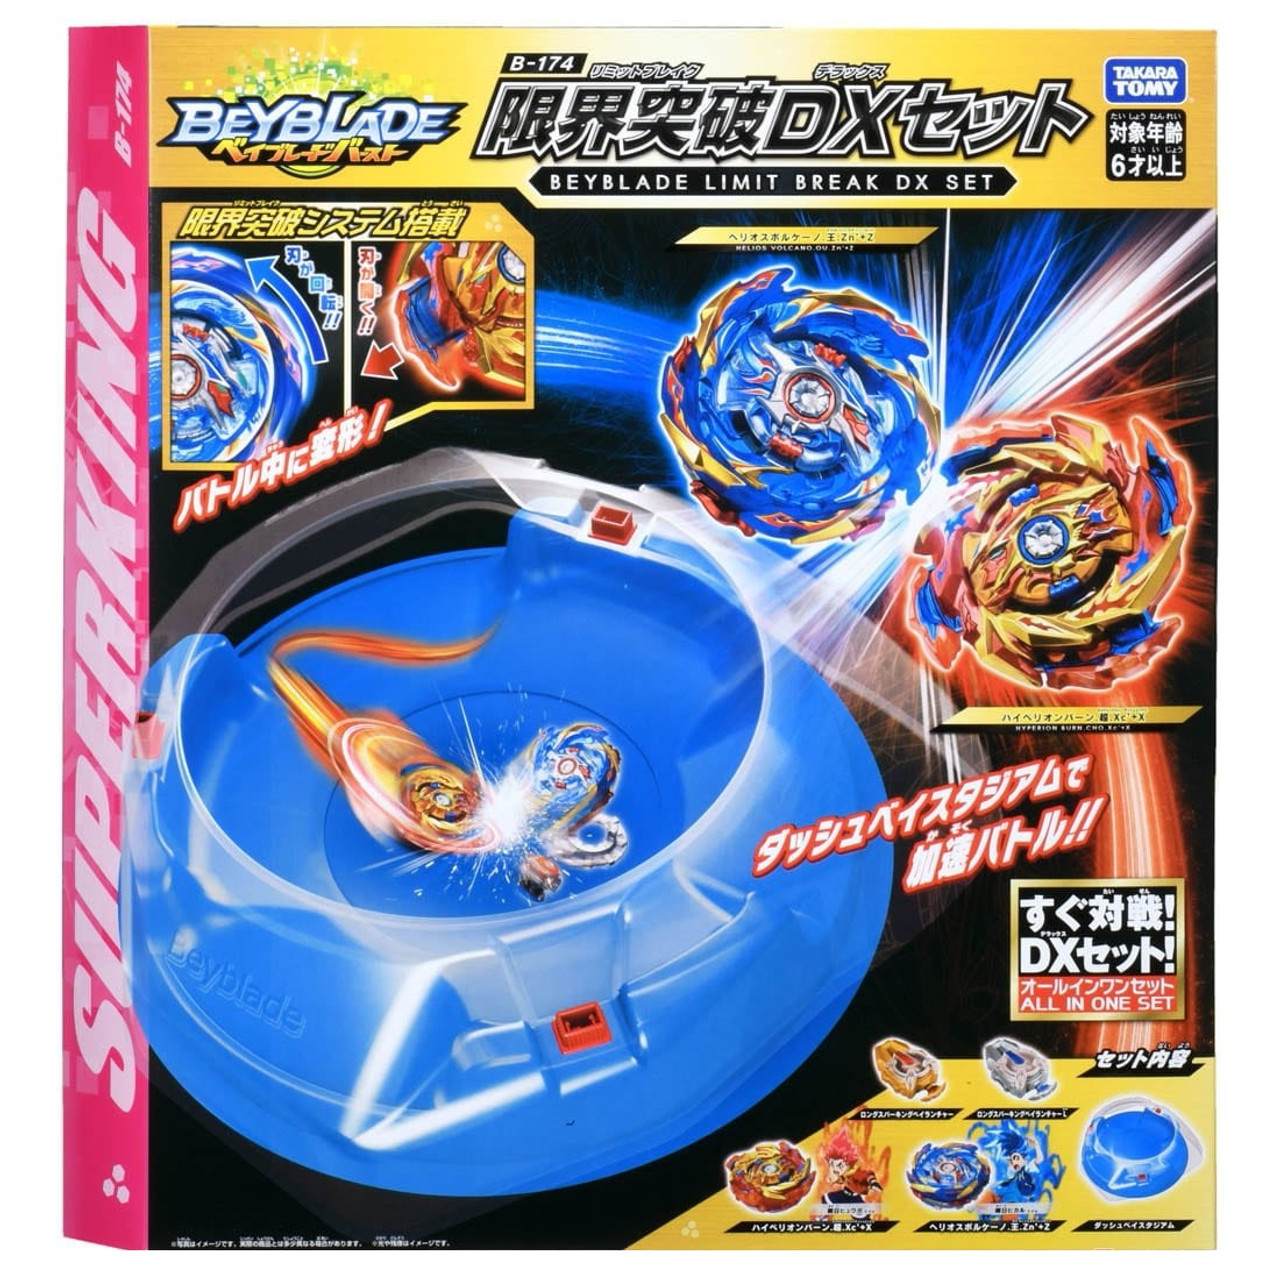 A box of beyblade toy